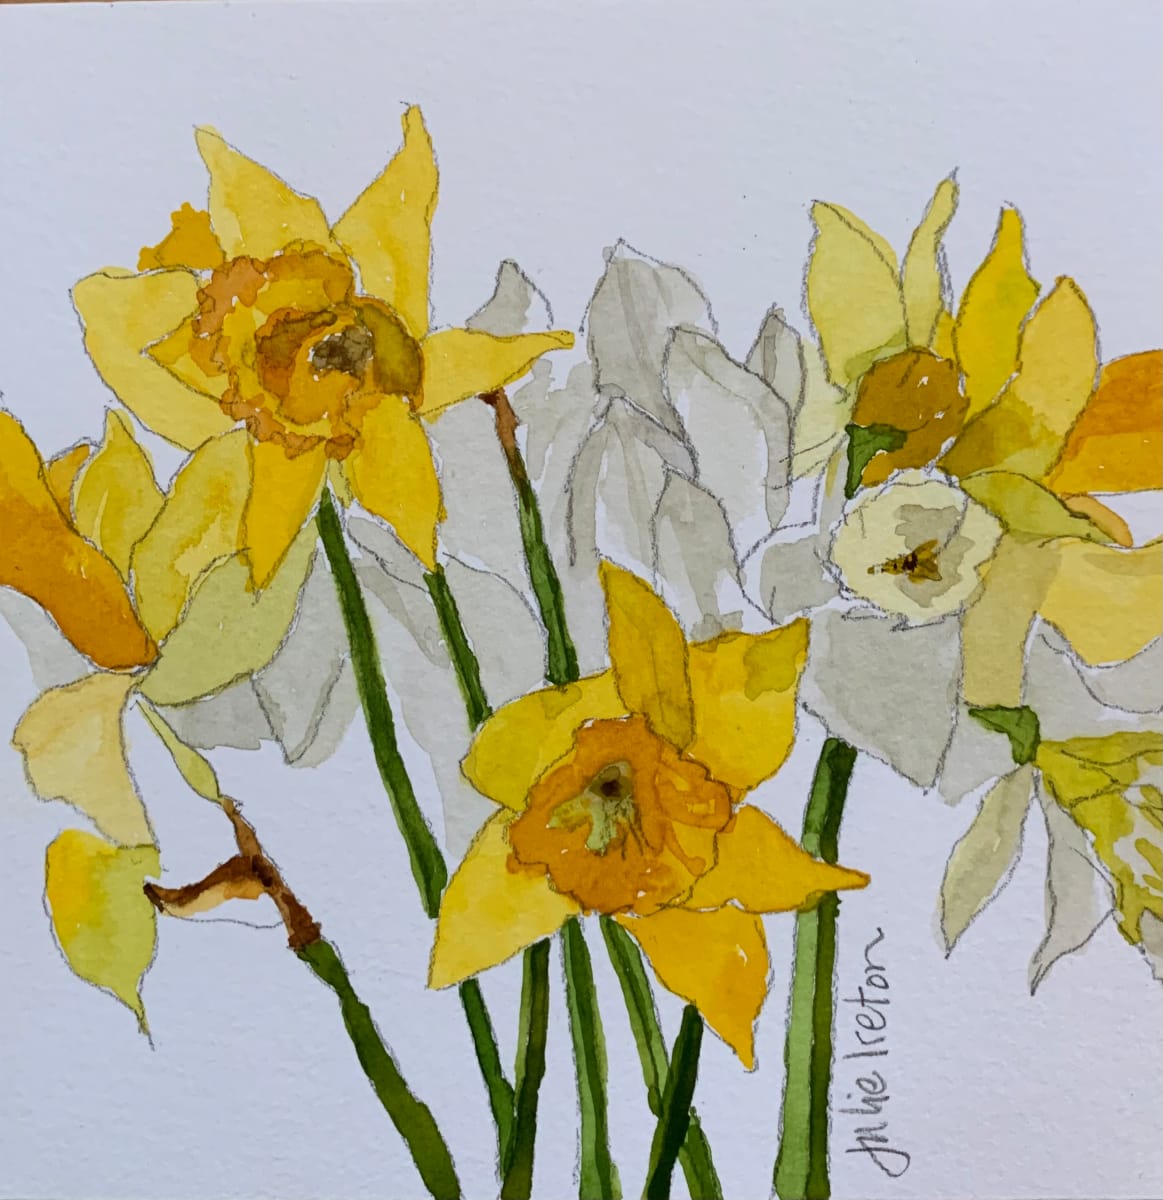 A Host of Golden Daffodils by Julie Ireton  Image: A spring bouquet of wild daffodils, picked earlier that day and casually arranged as the table’s centrepiece 